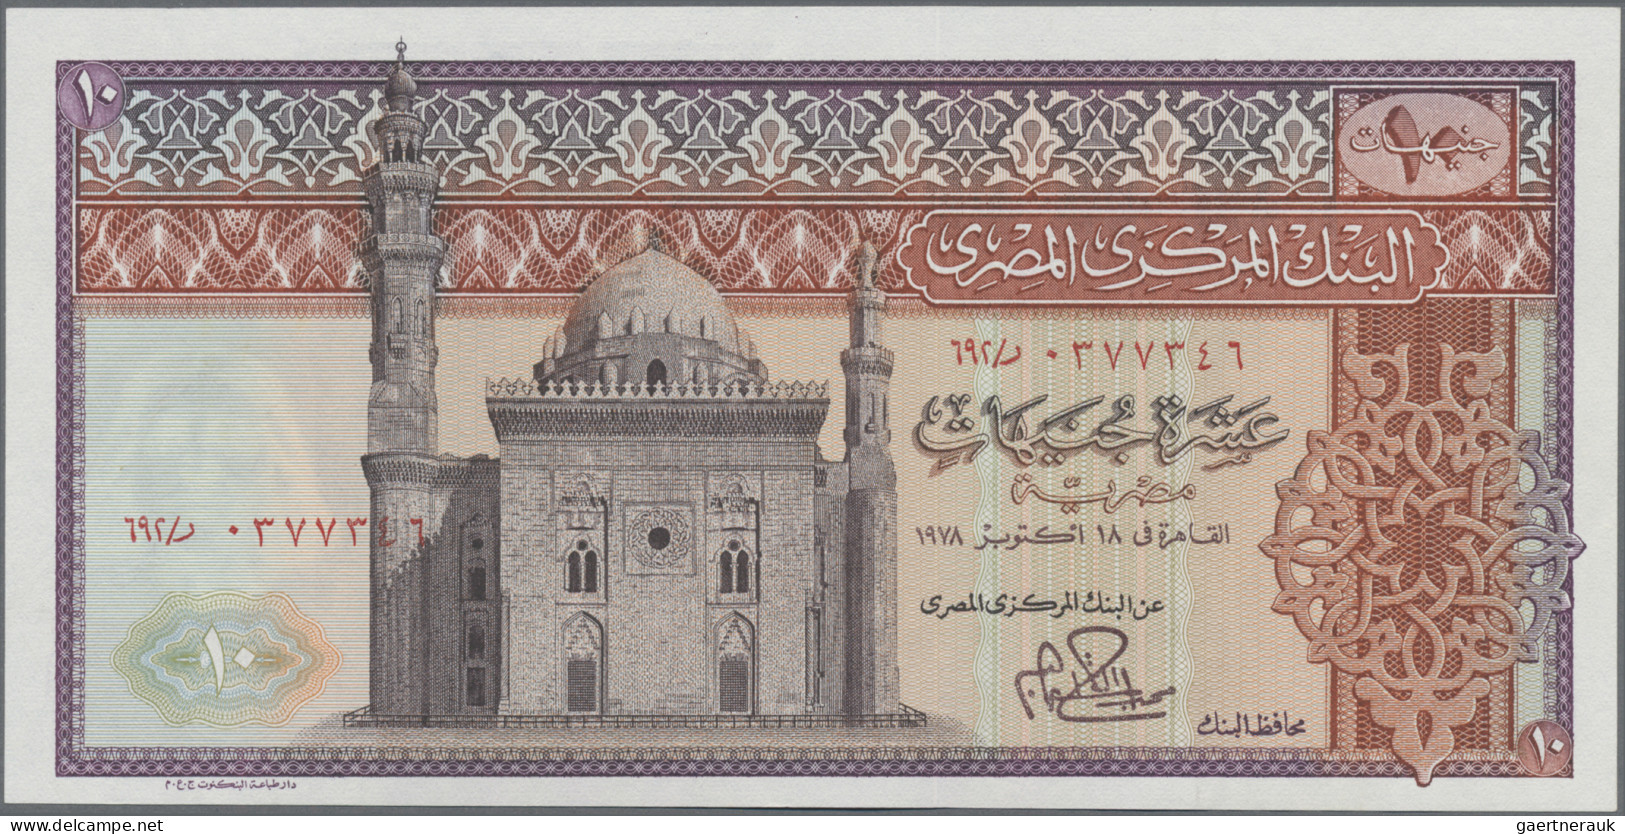 Egypt: National Bank of Egypt, huge lot with 35 banknotes, series 1970-2009, com